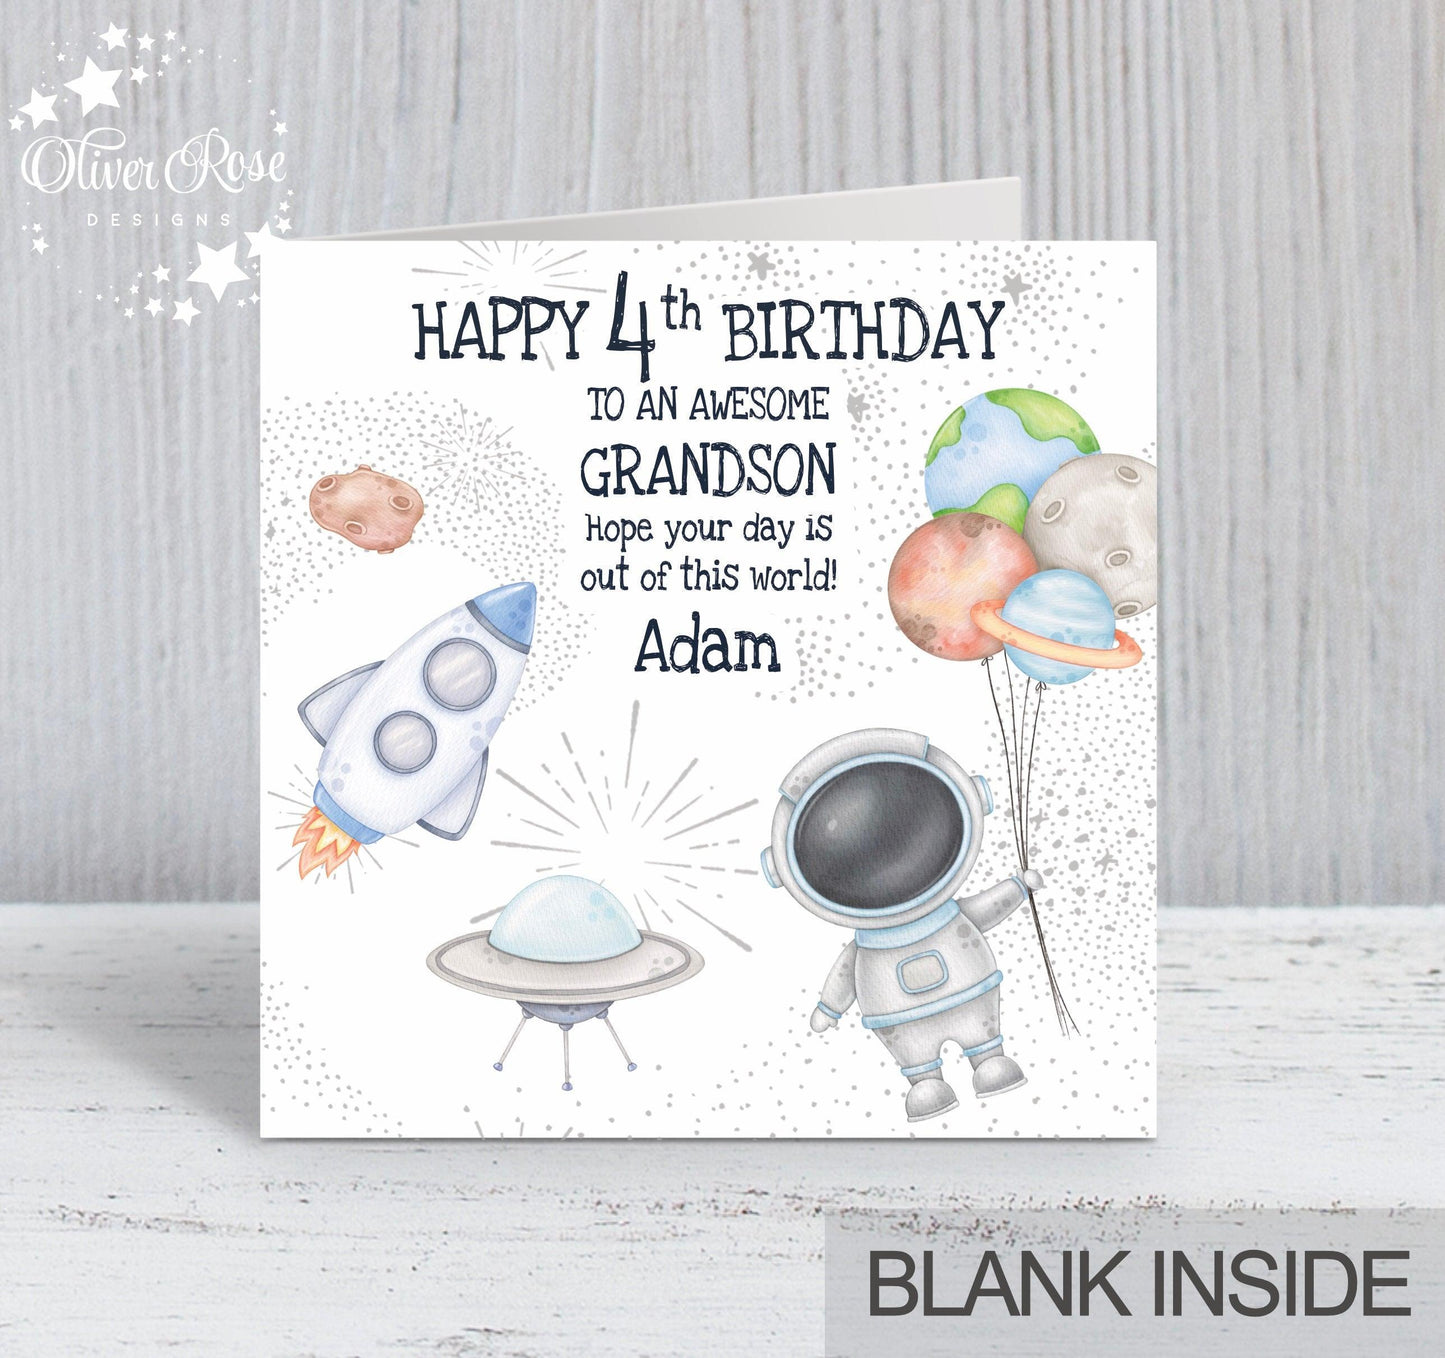 Space Theme Astronaut 4th Birthday Card, Rocket, Spaceship, Planets, Asteroid, Spaceman, Grandson, Personalised, hope your day is out of this world